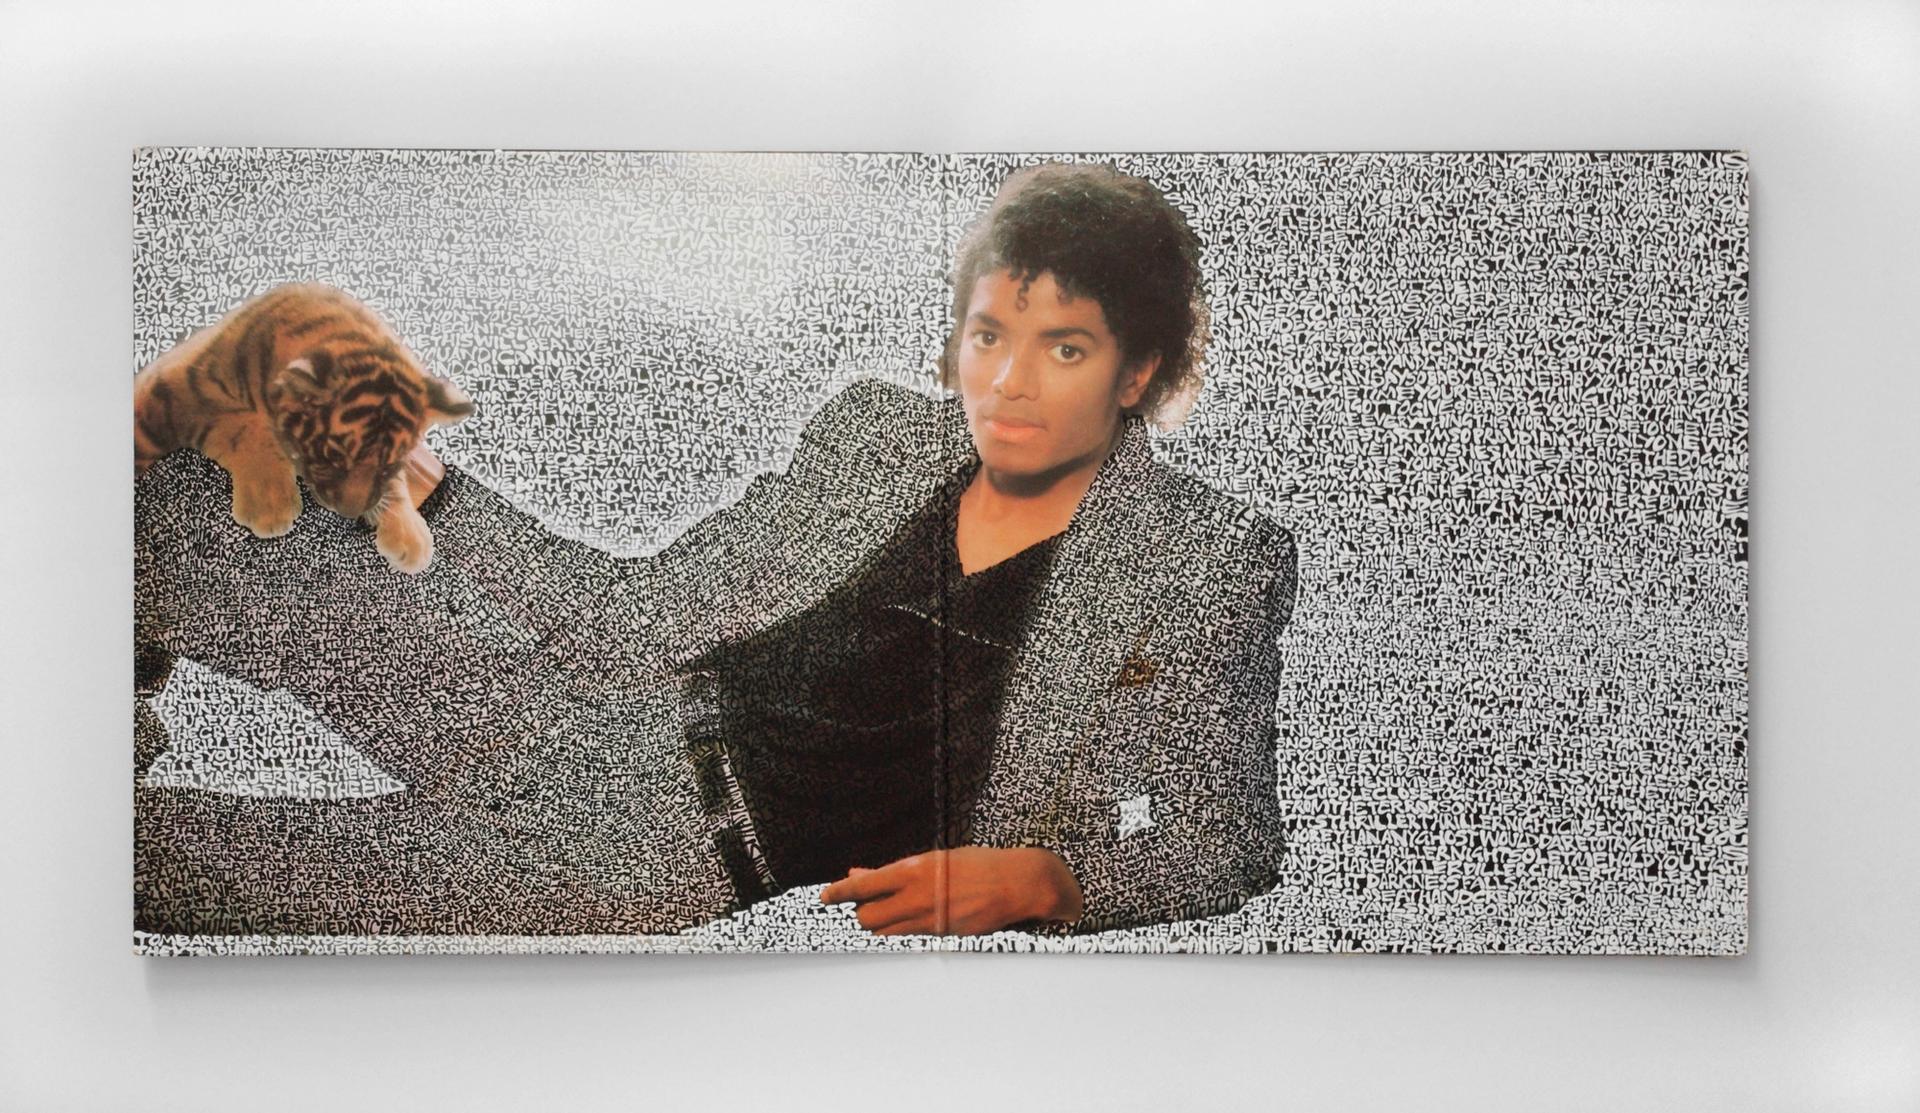 Fandom at the Grand Palais: Michael Jackson On The Wall in Paris